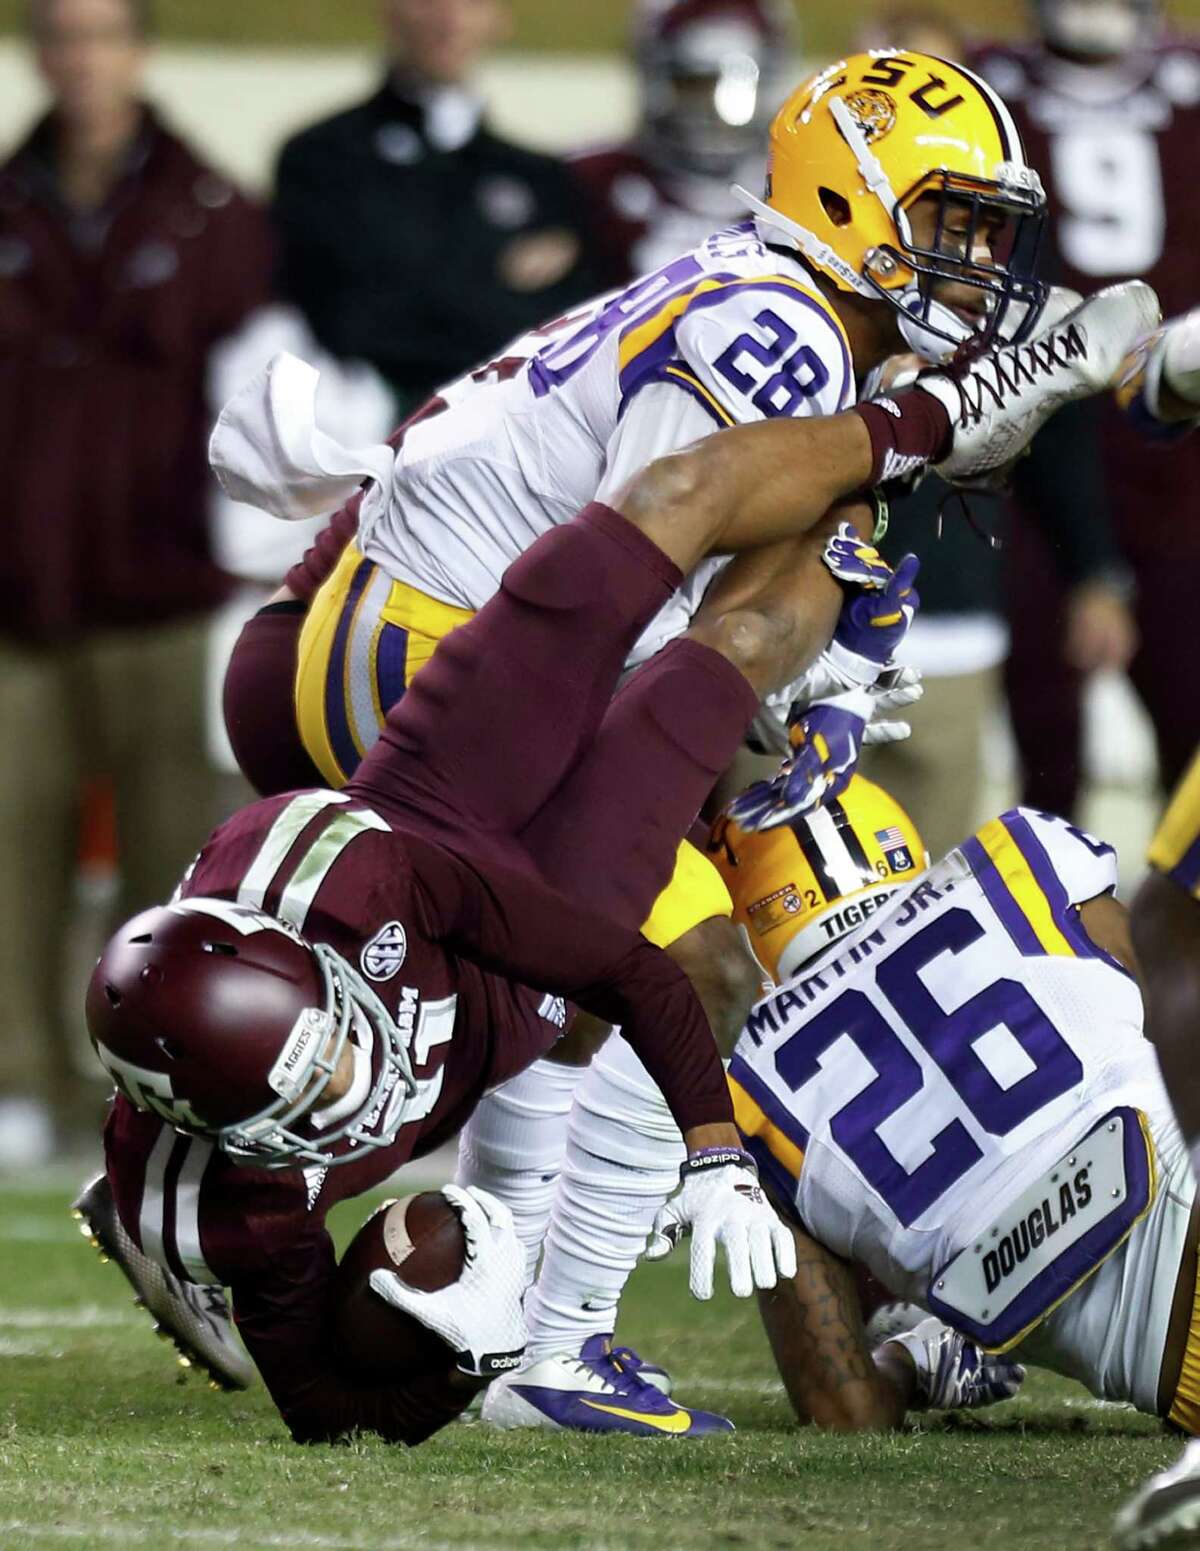 Texas A&M wide receiver Josh Reynolds (11) is tackled by LSU safety Jalen Mills (28) during the fourth quarter of an NCAA college football game at Kyle Field Thursday, Nov. 27, 2014, in College Station.